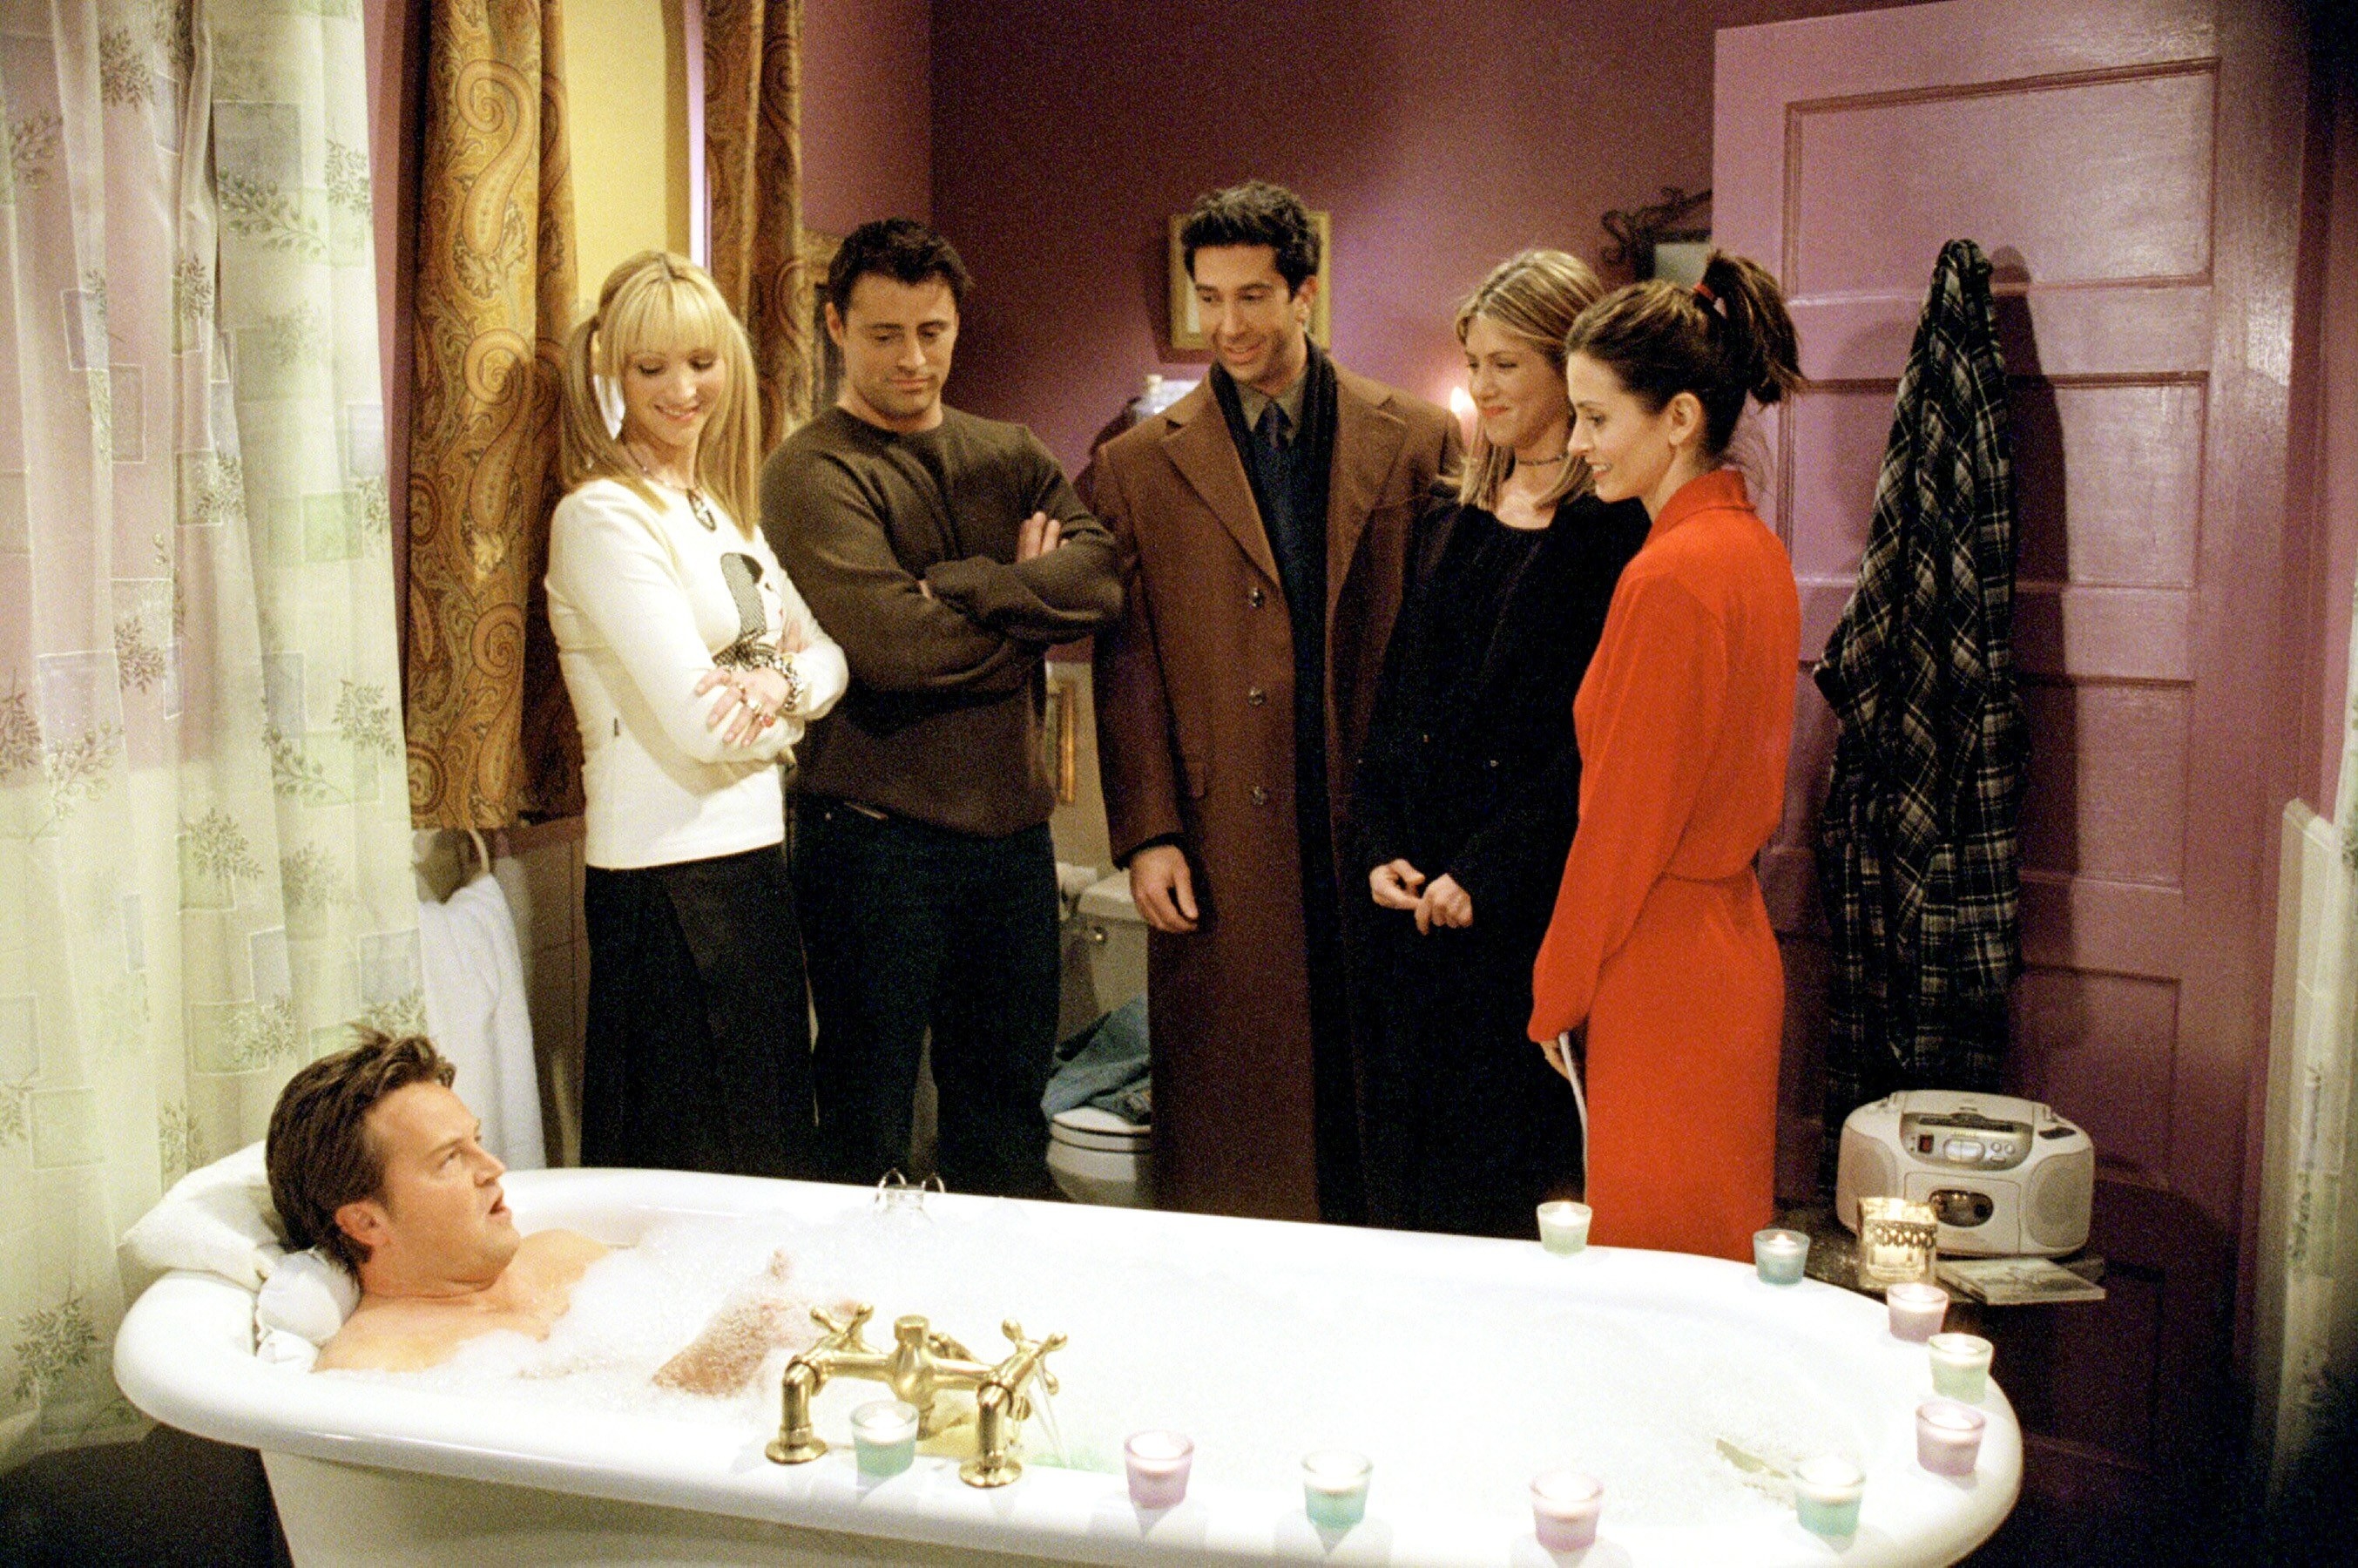 5 of the friends looking on as chandler takes a bath